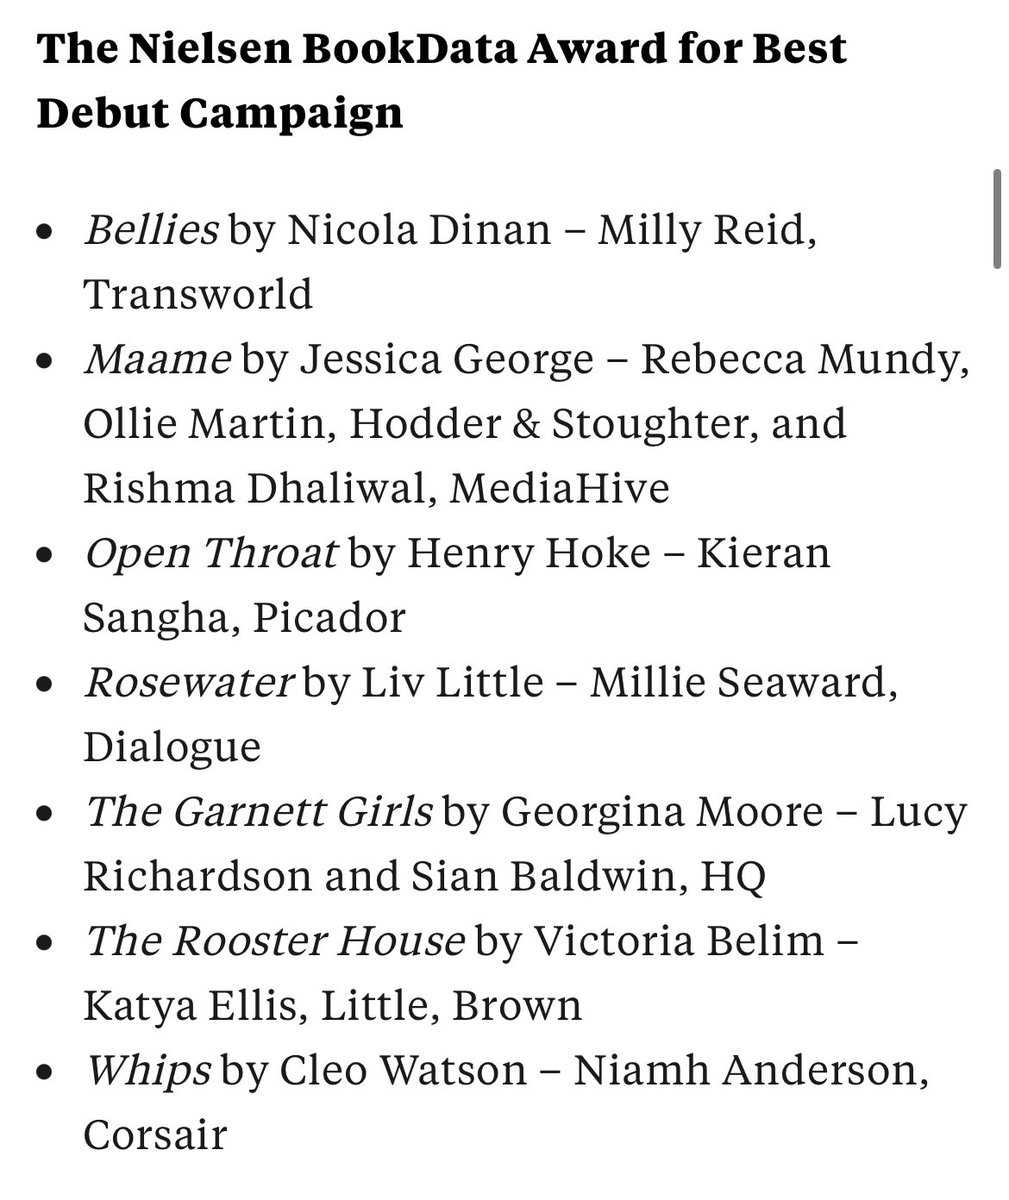 Over the moon to be shortlisted for a @publicitycircle Annual Award with the amazing @SianBaldwin for our campaign for #TheGarnettGirls by @PublicityBooks @HQstories 🥳💙 congrats to all shortlisted publicists!